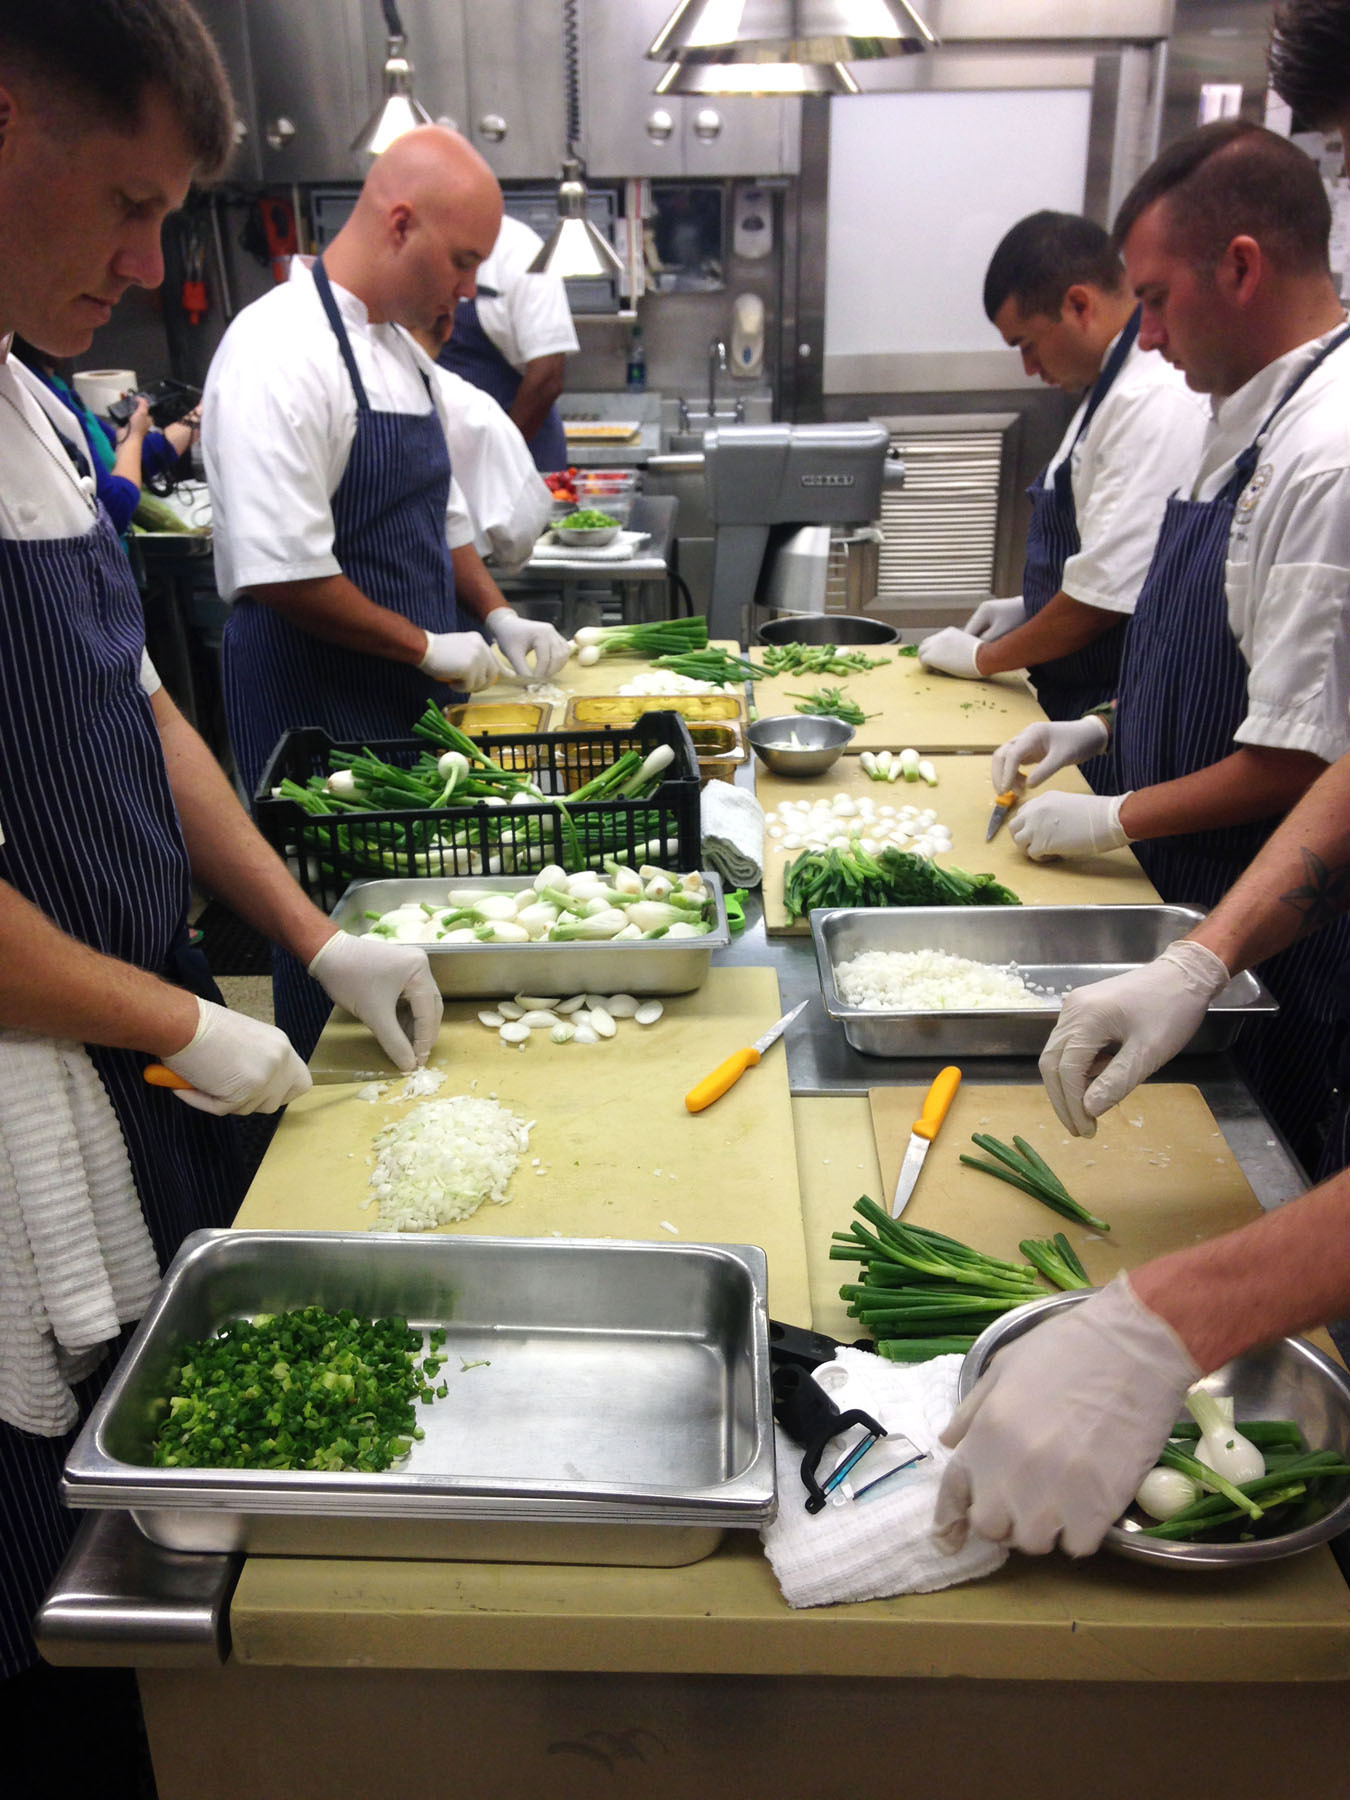 White House chefs chop a lot of vegetables to prepare for a dinner of 400 Tuesday night. Photo: Gregory Barber/NPR